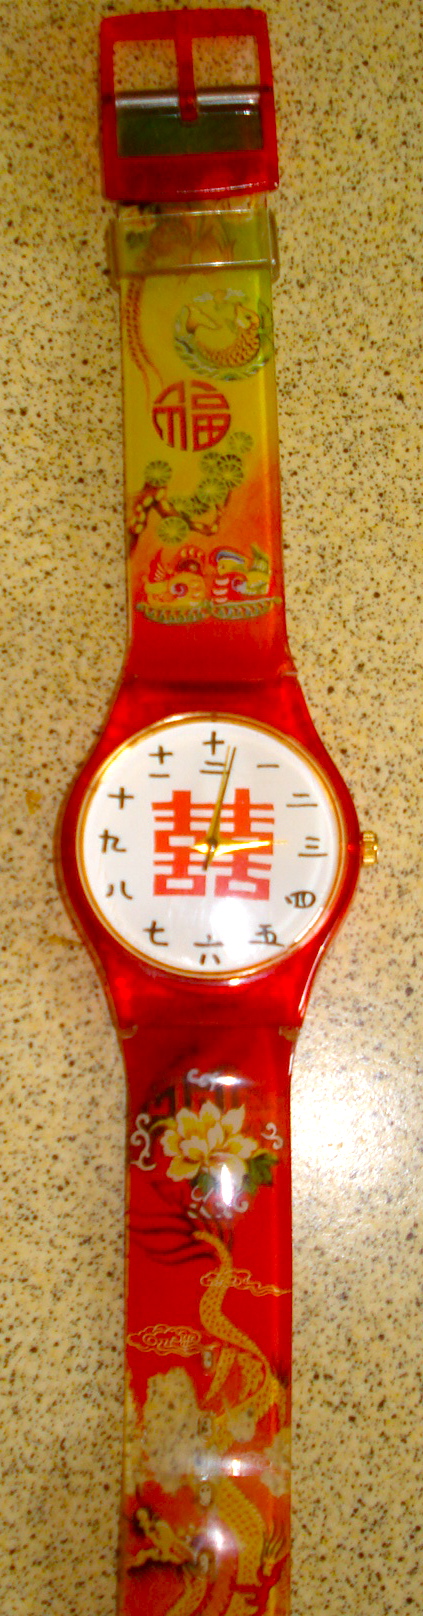 Chinese Battery Watch with Chinese Numerals